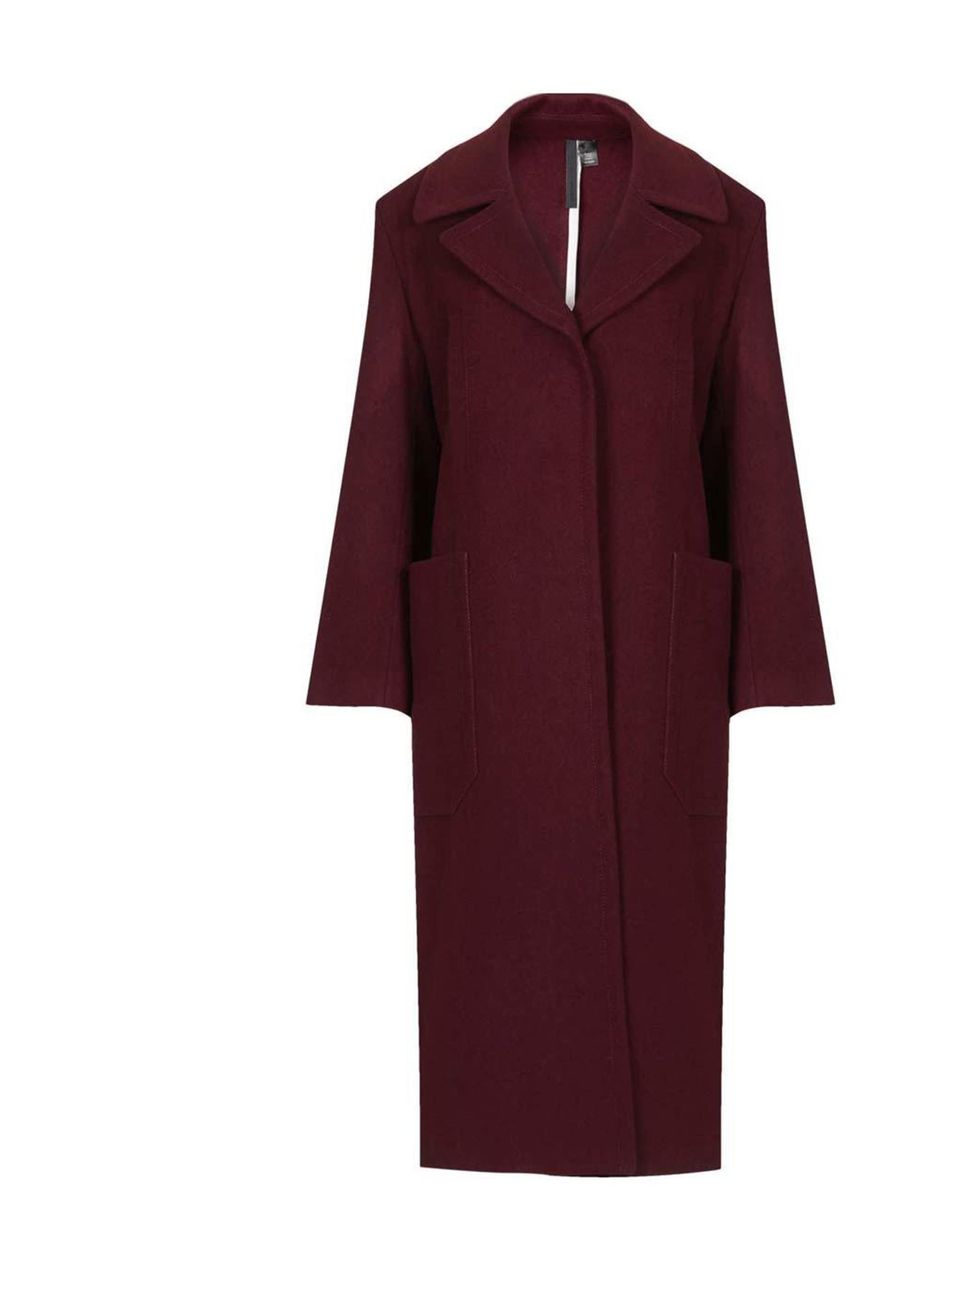 <p>Team your outfit with a big oversize coat.</p><p>This burgundy cocoon-shape one is from <a href="http://www.topshop.com/en/tsuk/product/new-in-this-week-2169932/new-in-this-week-493/long-wool-pocket-coat-by-boutique-2489285?bi=1&amp;ps=20">Topshop Bout